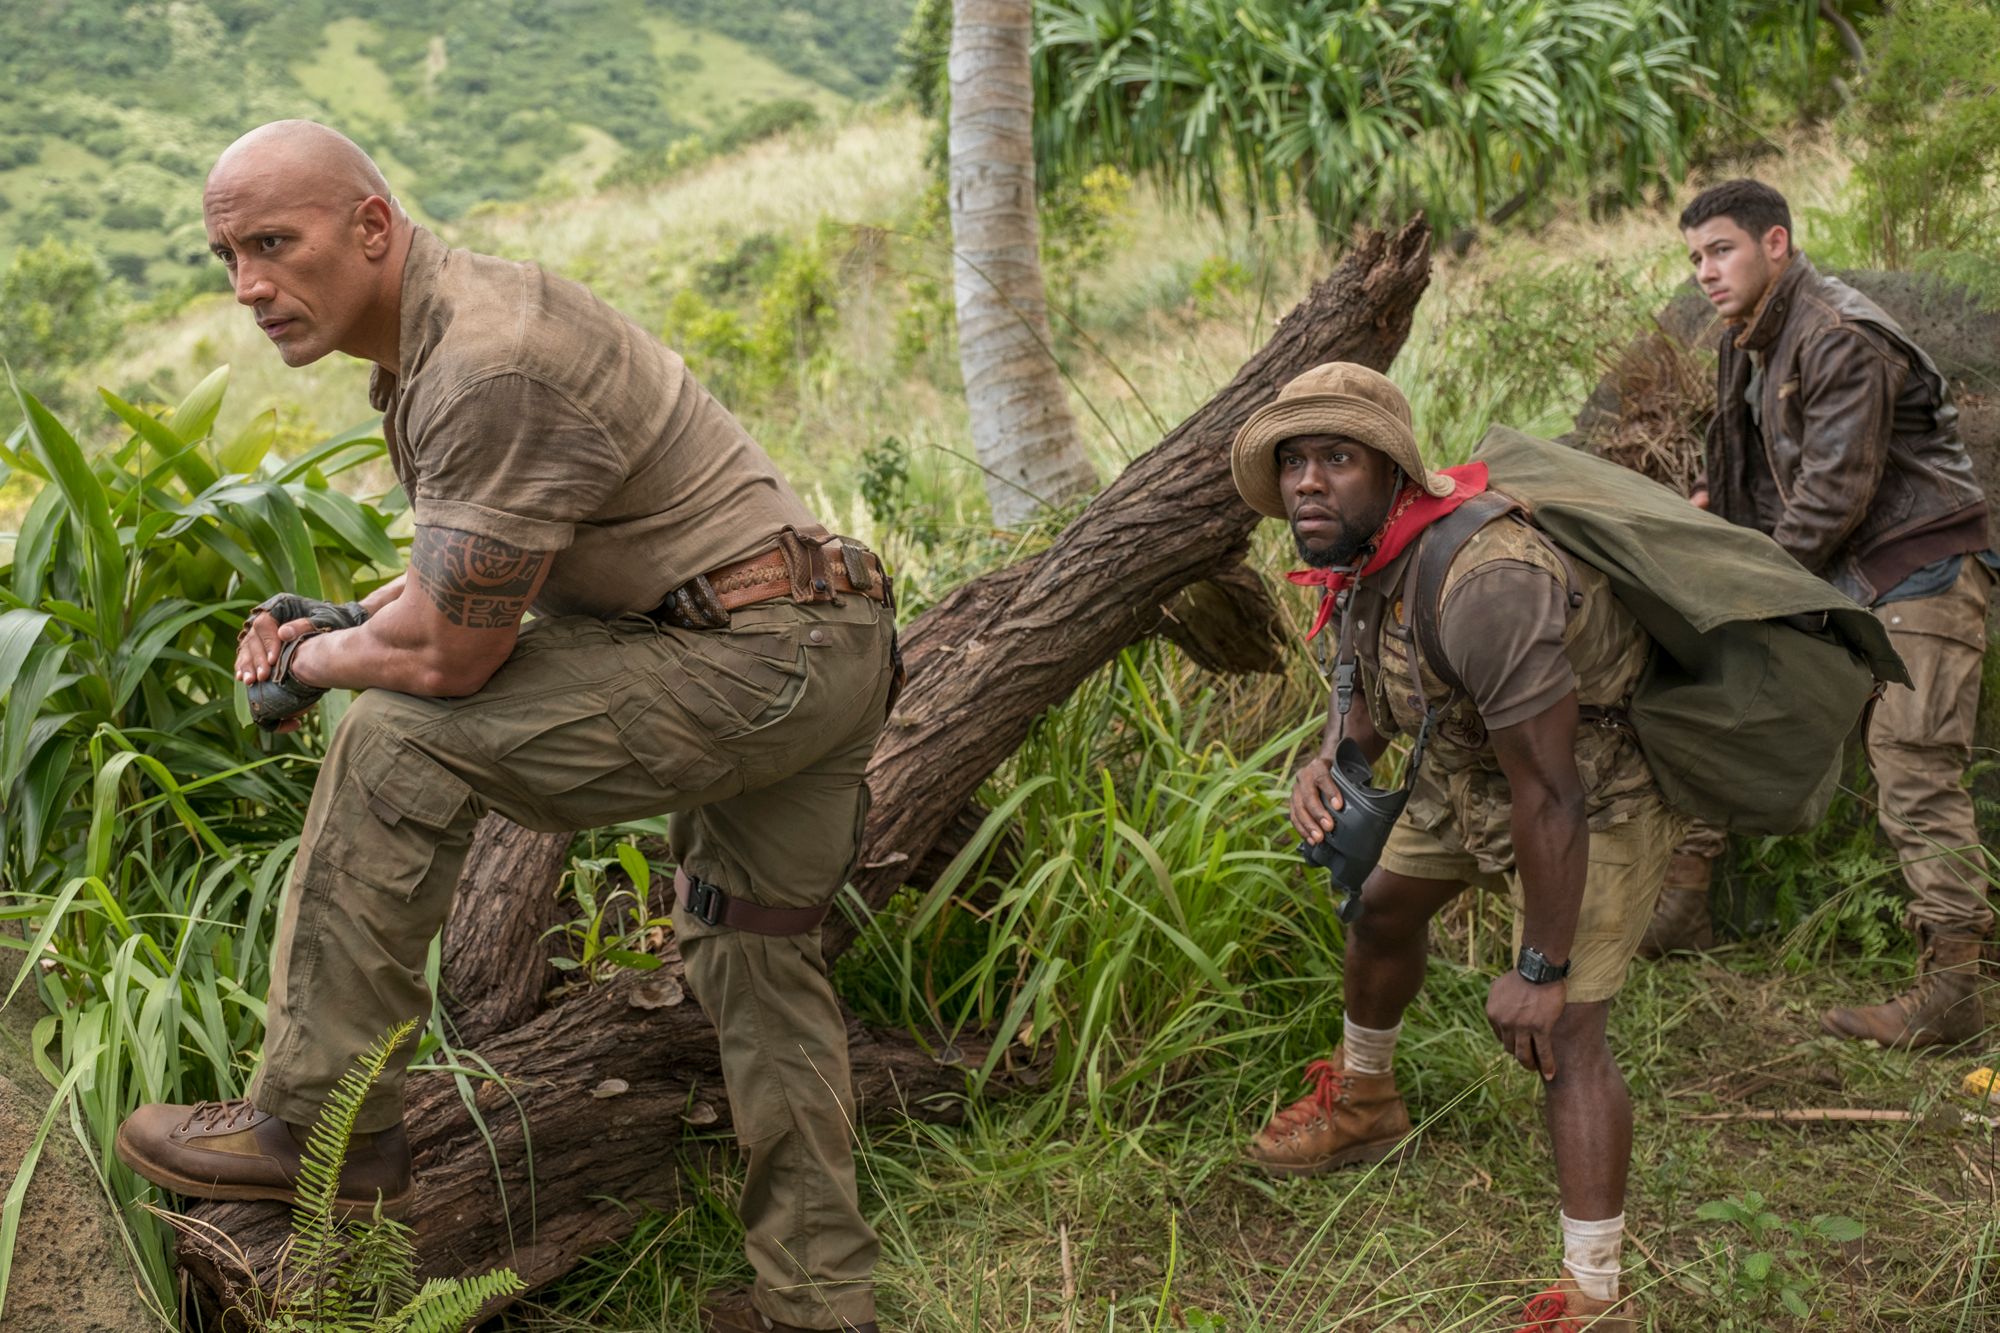 Weekend Box Office: Jumanji Welcome to the Jungle Tops All | Collider